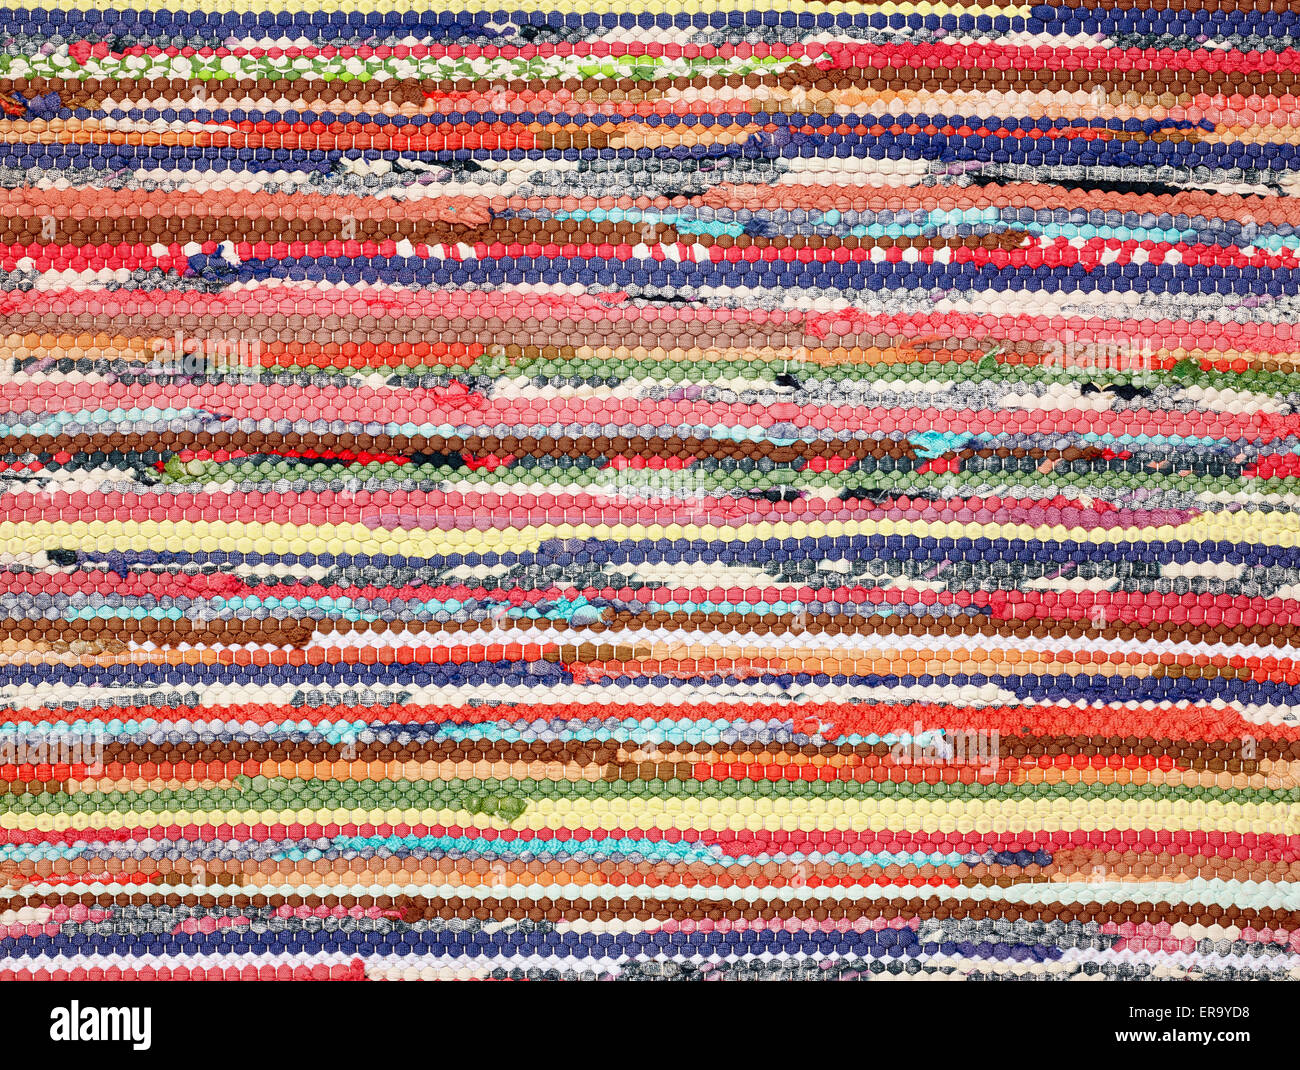 Bright colorful rag rug, 7320x5484px, IIQ raw file available Stock Photo